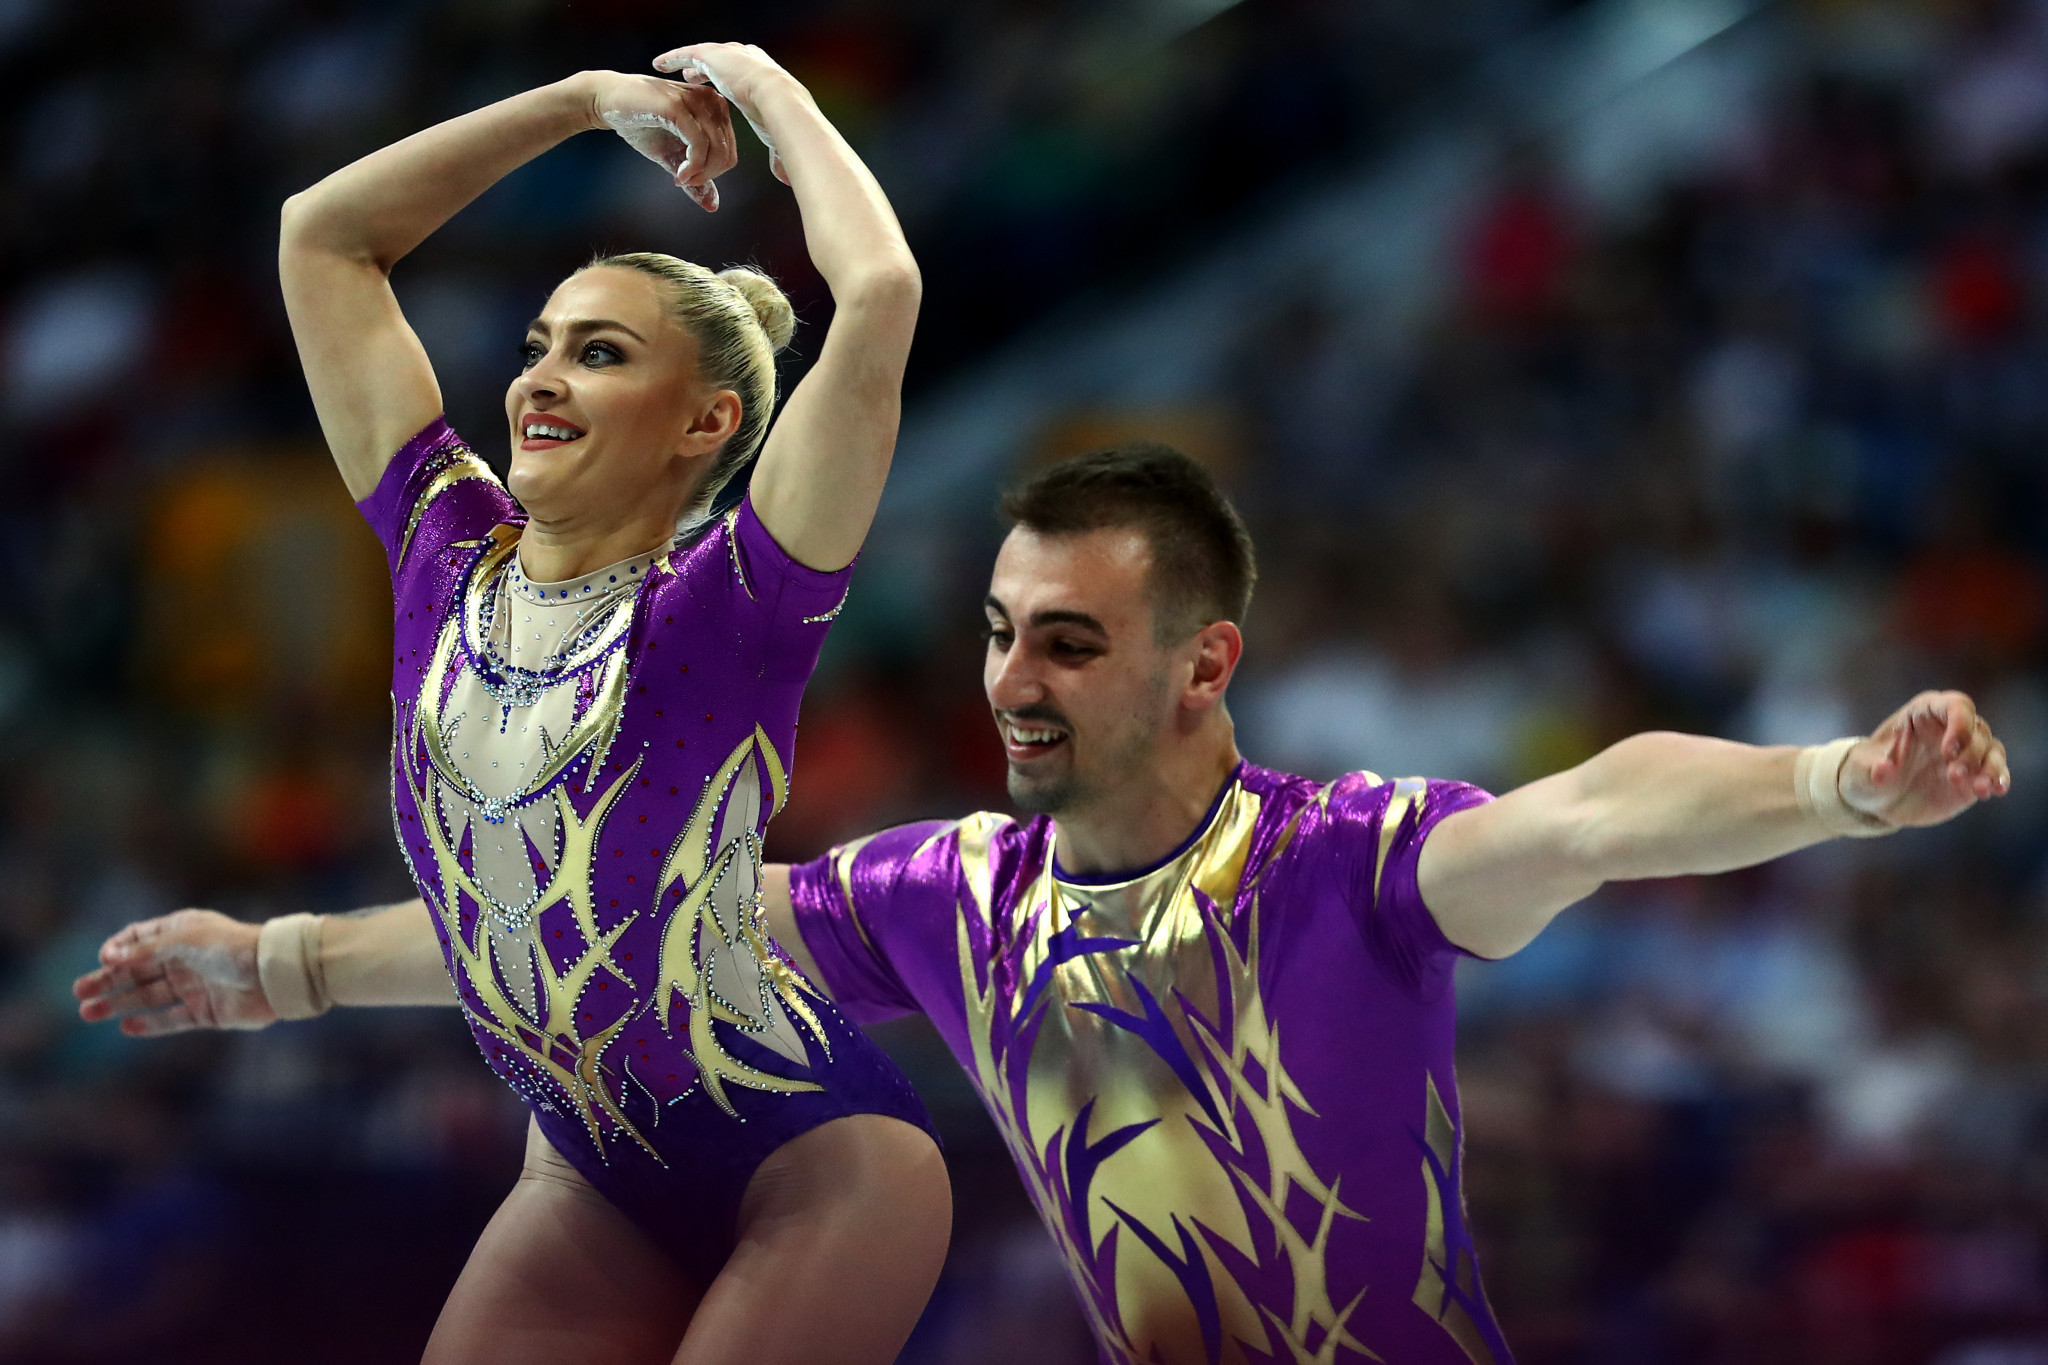 Finishing just behind them was Romania's Dacian Nicolae Barna and Andreea Bogati ©Getty Images